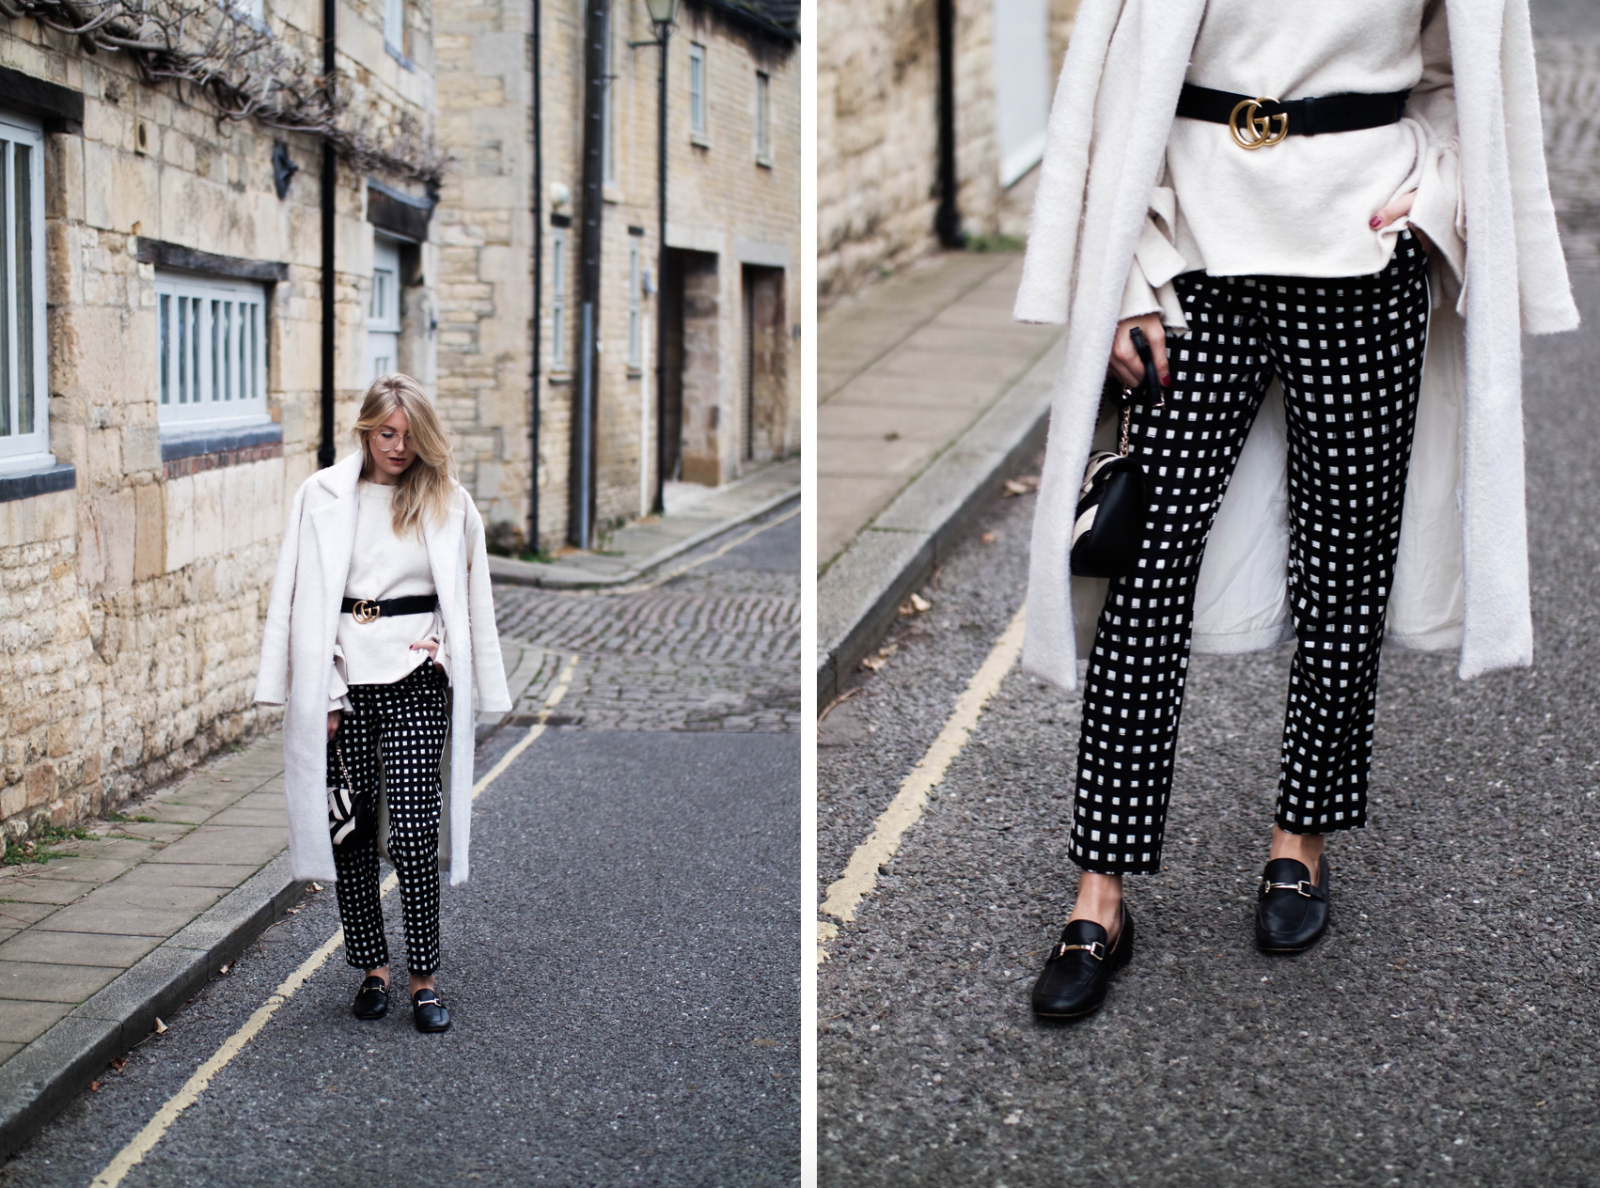 Printed Trousers Trying Something New - Fashion Blogger Styling Tips